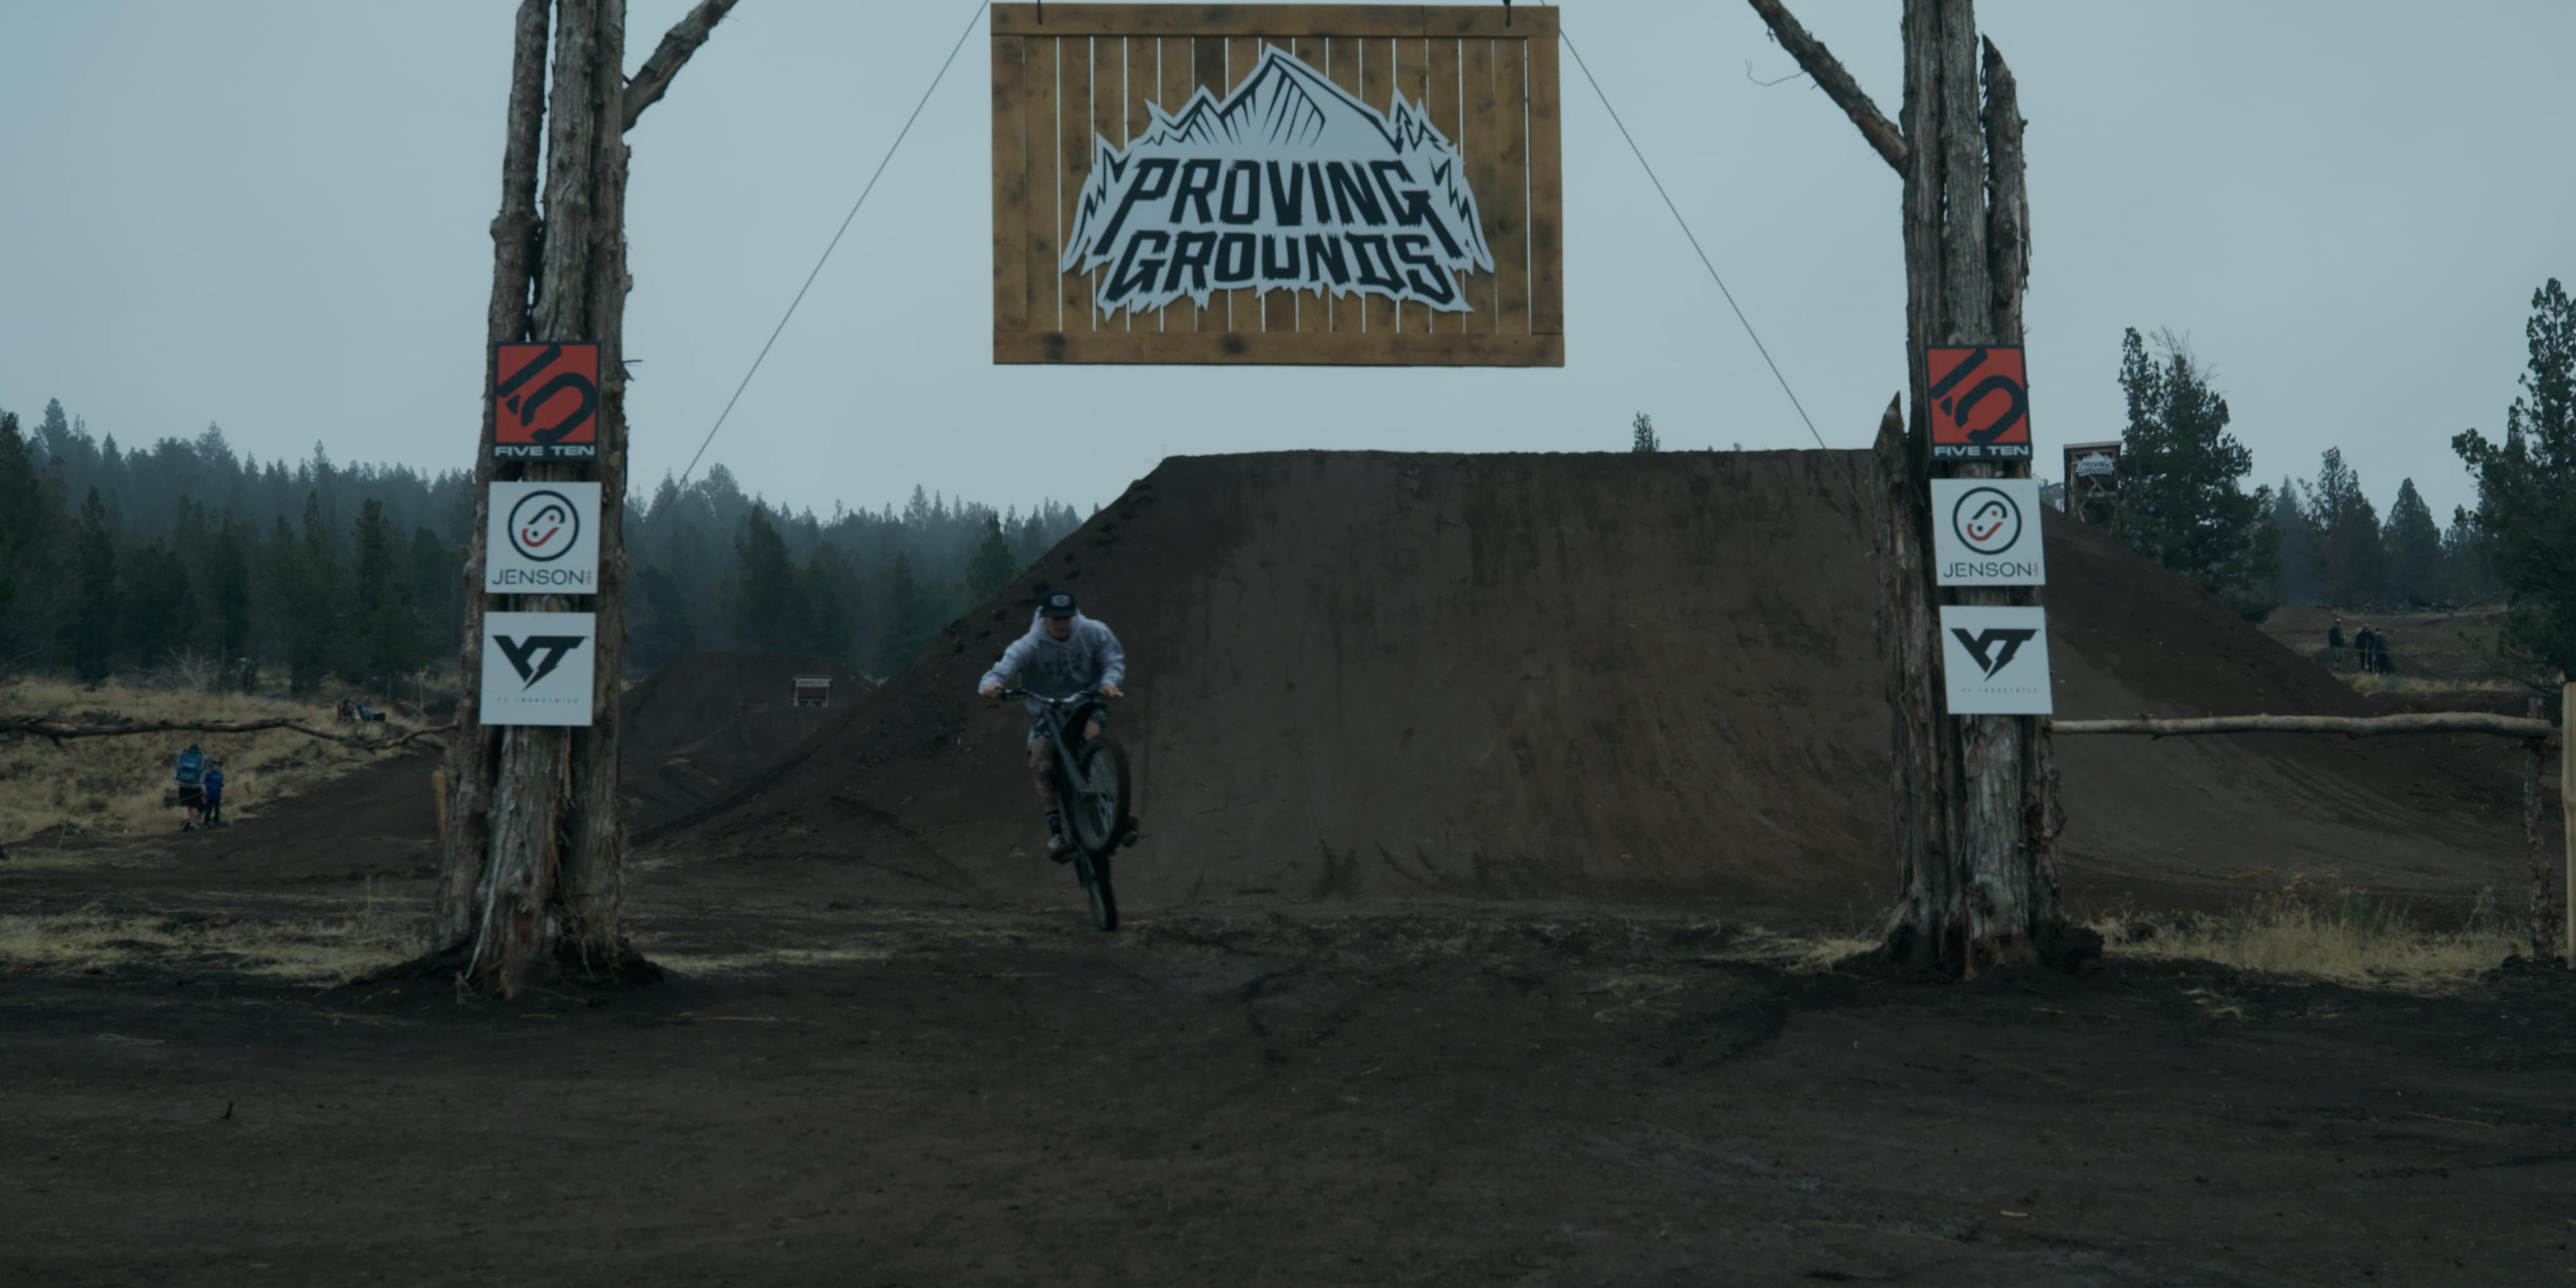 2021_ROC_Reed_Boggs_Proving_Grounds_Frame_02